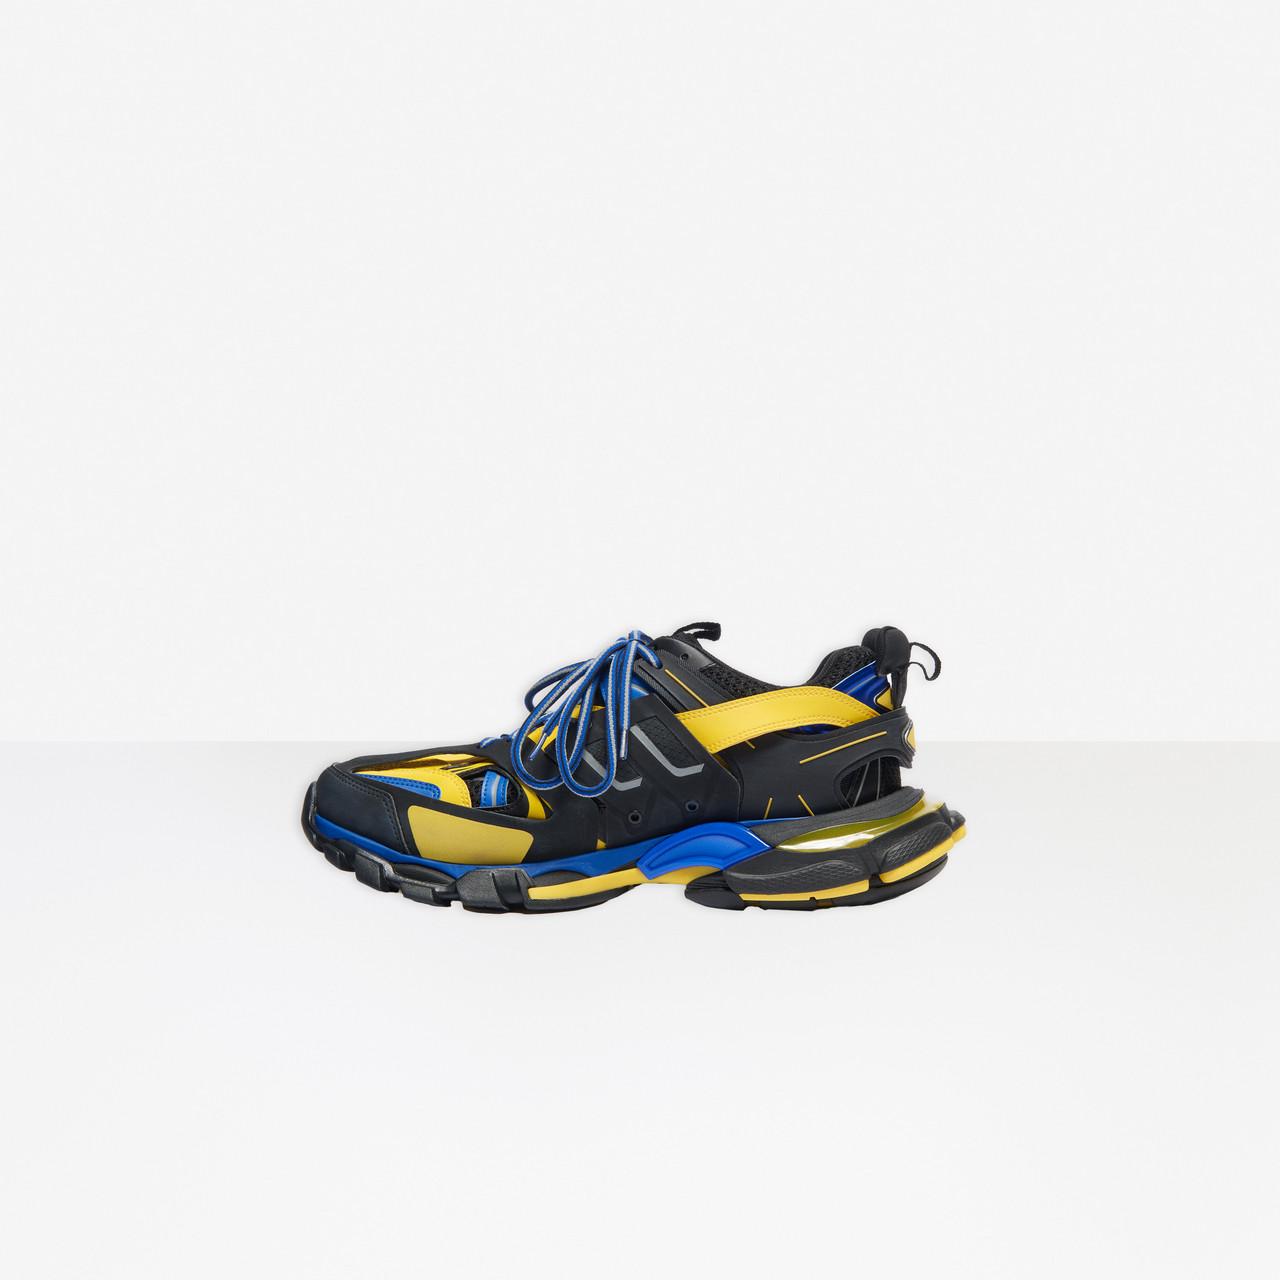 Balenciaga Synthetic Track Sneaker in Black/Yellow (Blue) for Men - Lyst